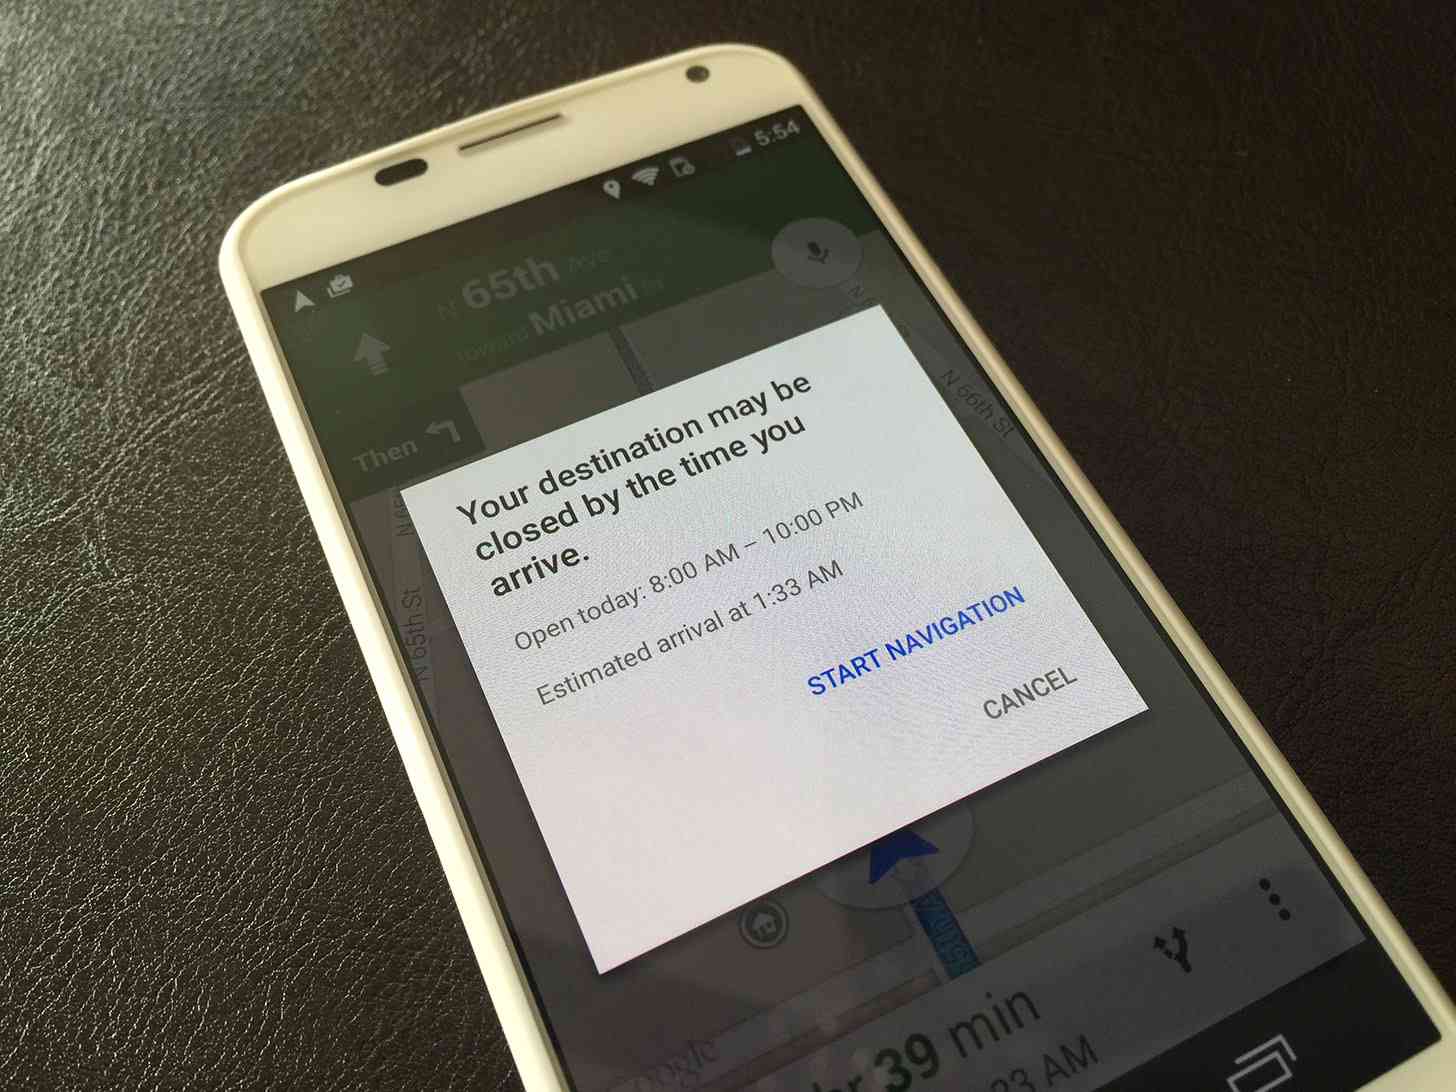 Google Maps for Android update closed before arrival